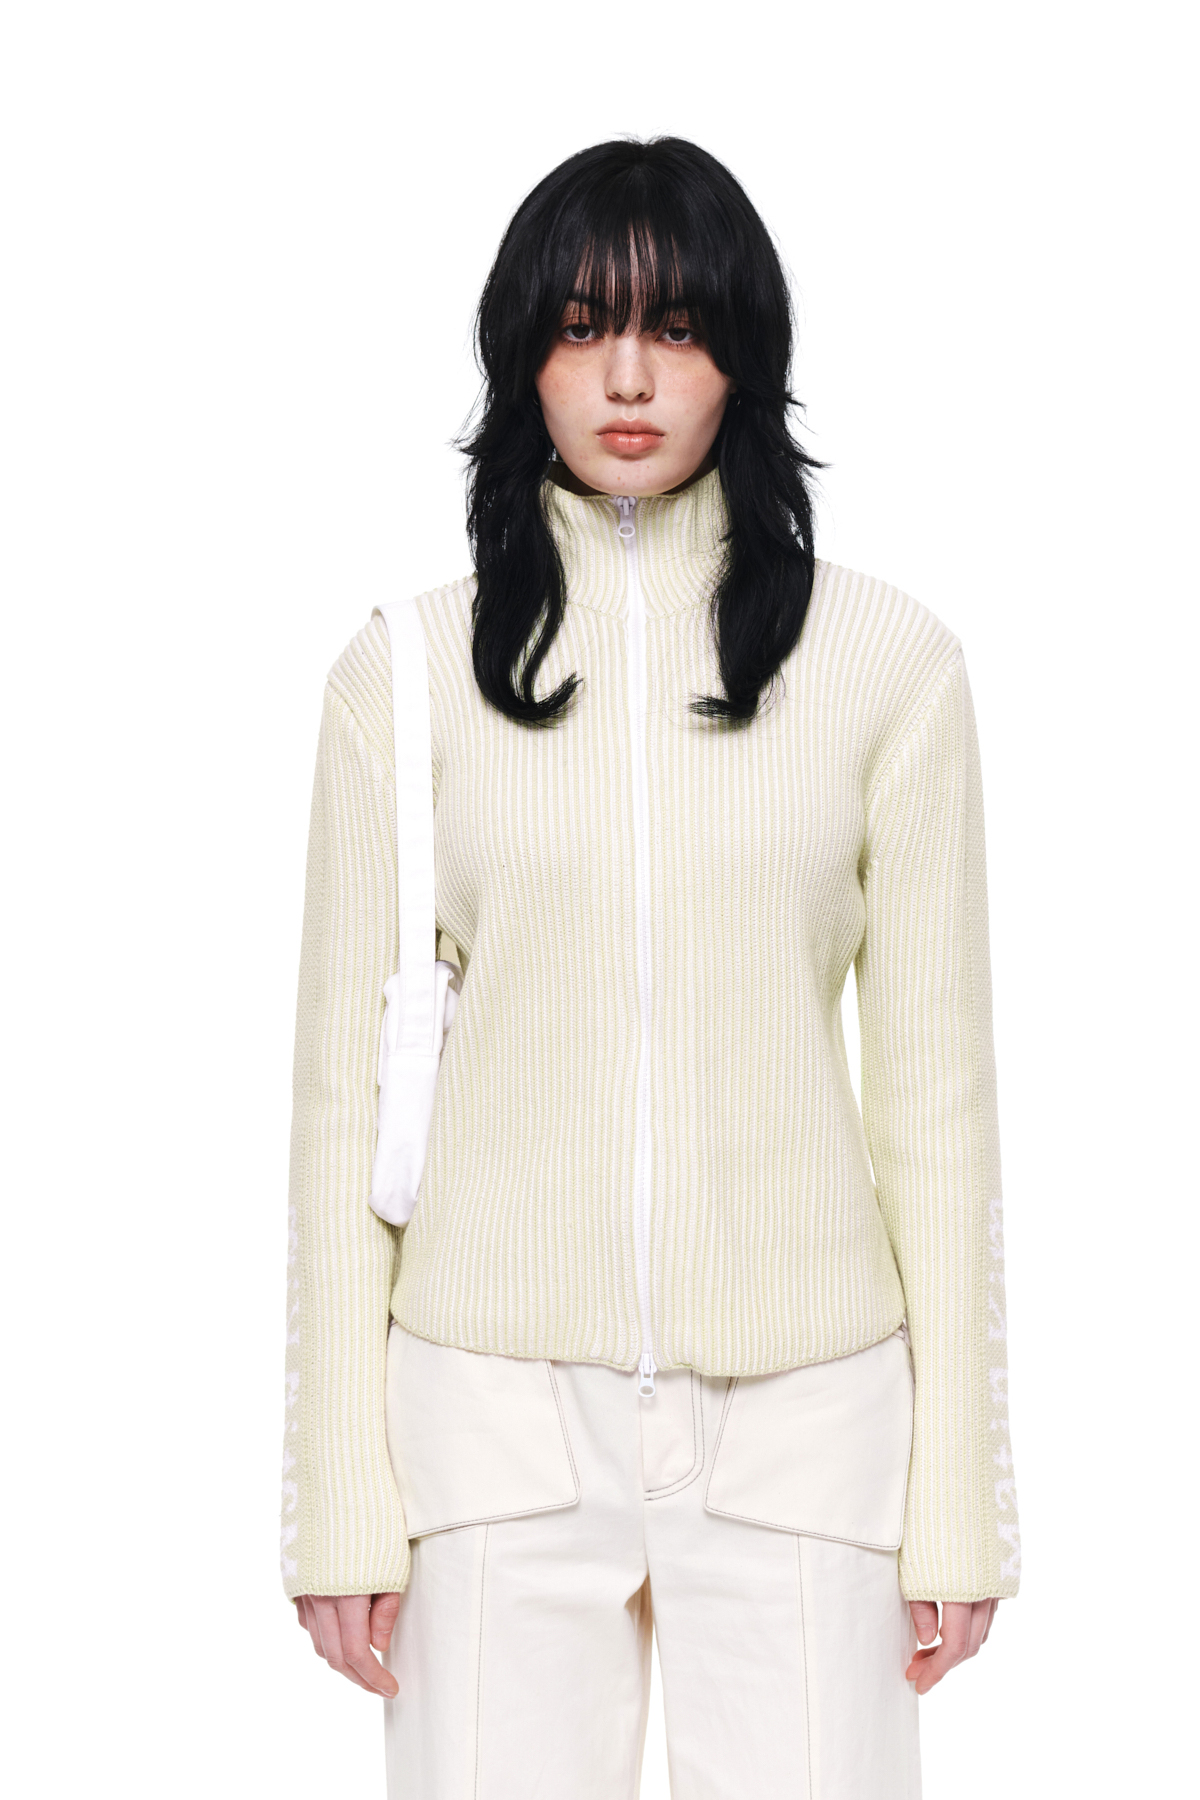 SLEEVE POINT ZIP UP CARDIGAN IN IVORY